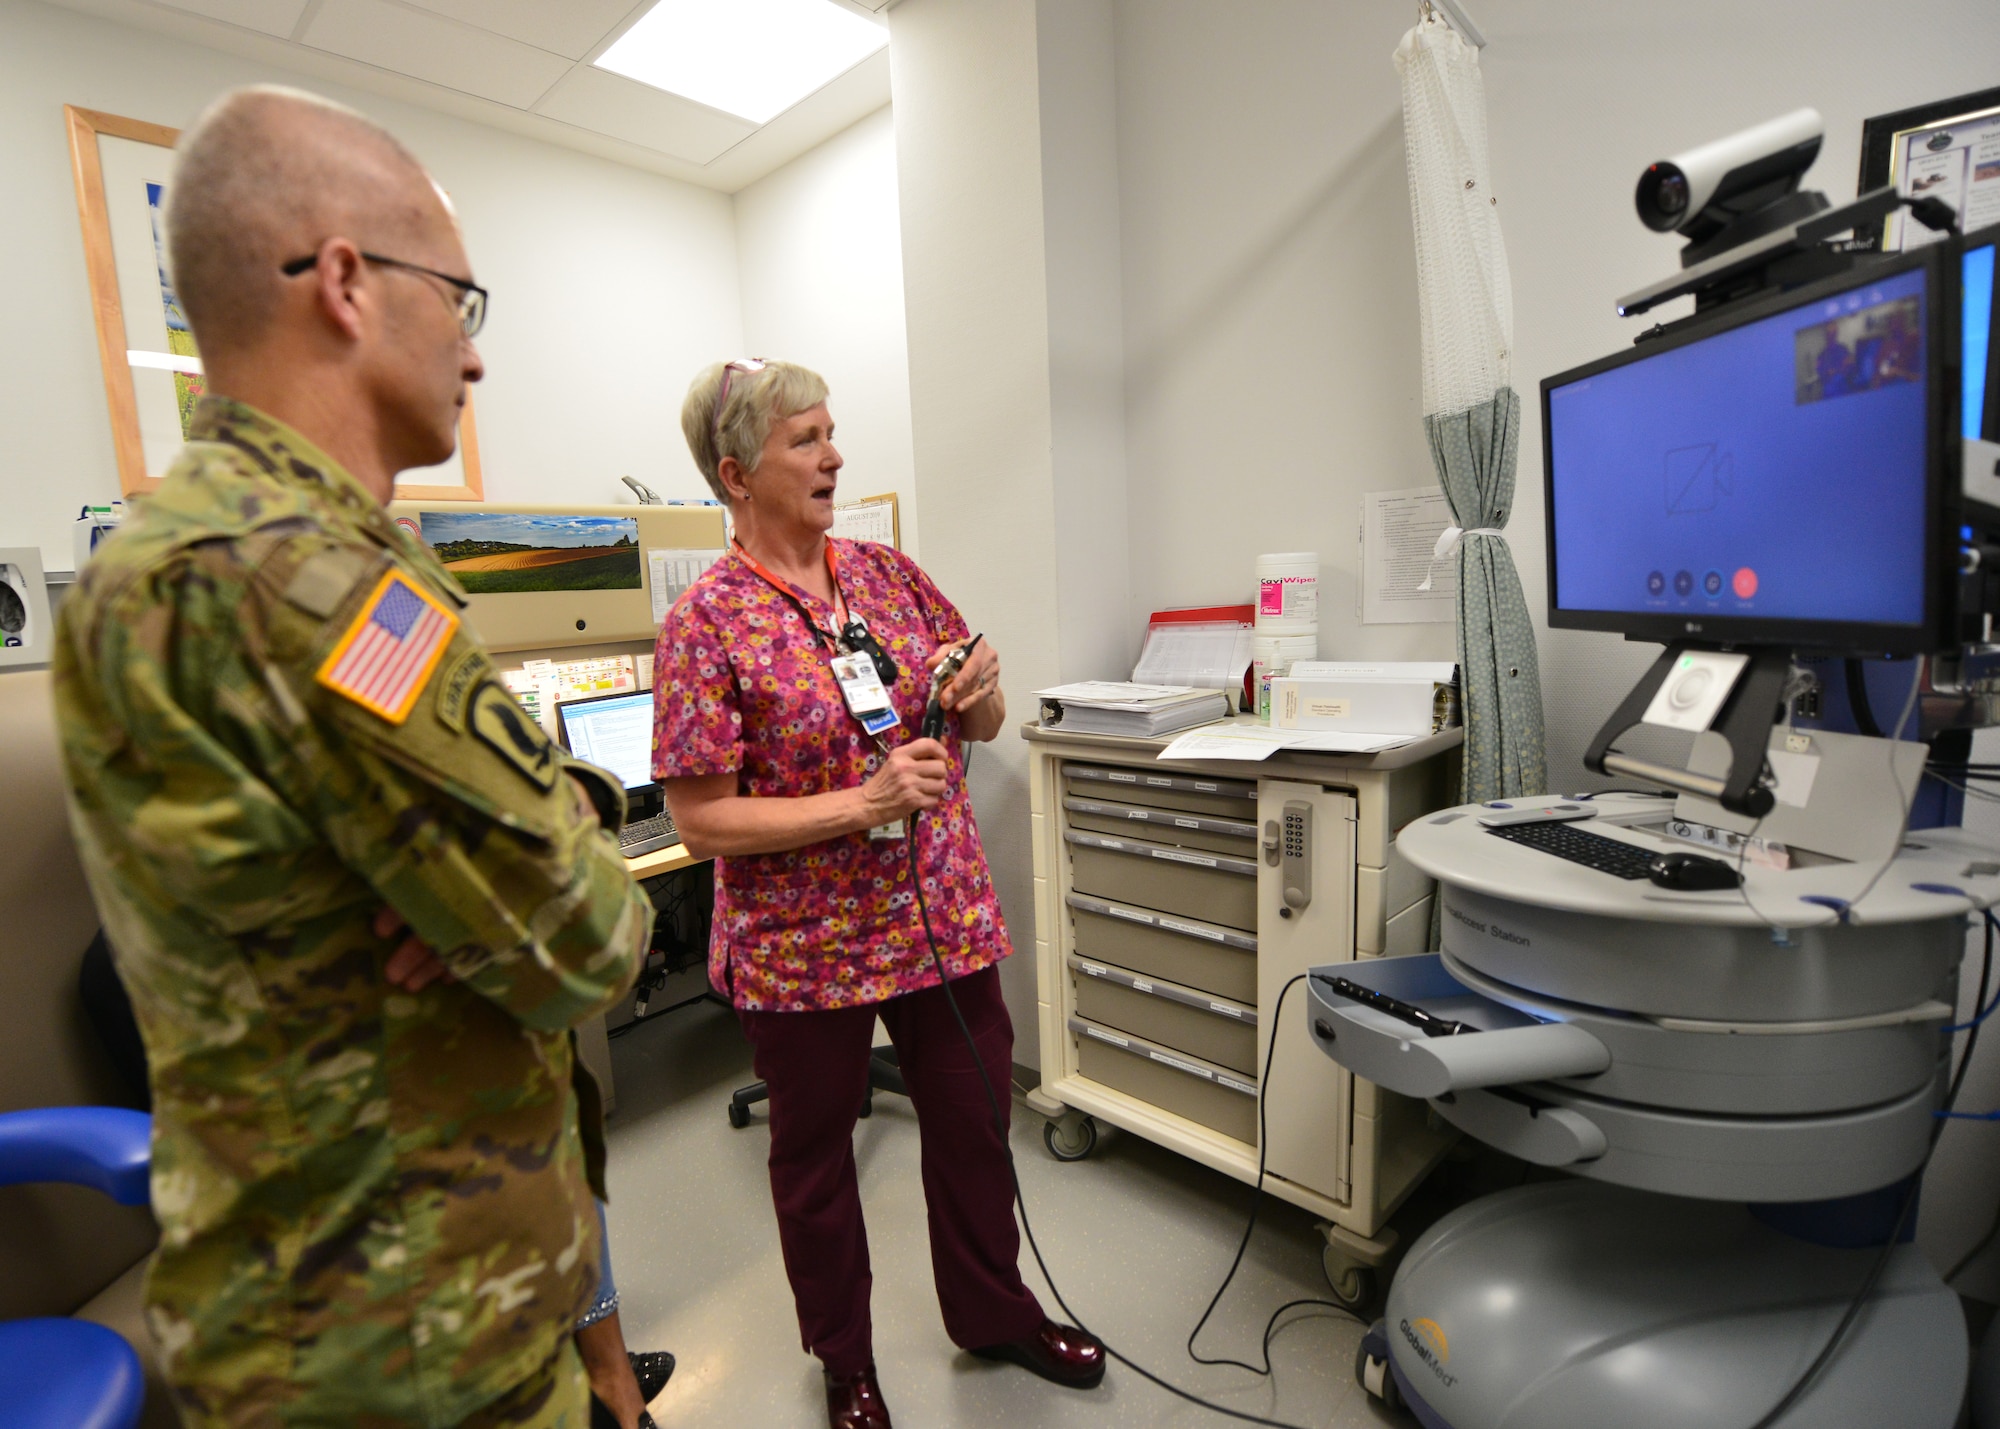 Lt. Gen. Ronald J. Place, the new Director of the Defense Health Agency, learns about the Stuttgart Army Health Clinic's Virtual Health Capabilities during his visit to Stuttgart on Sept. 11. Place was the Keynote Speaker at the TRICARE Eurasia Africa Commanders and Stakeholders Meeting at Sembach Kaserne, Germany, Sept 9-13. During the visit, he also met with senior military leaders and Surgeons General from Unified Combatant Commands. (Courtesy photo)